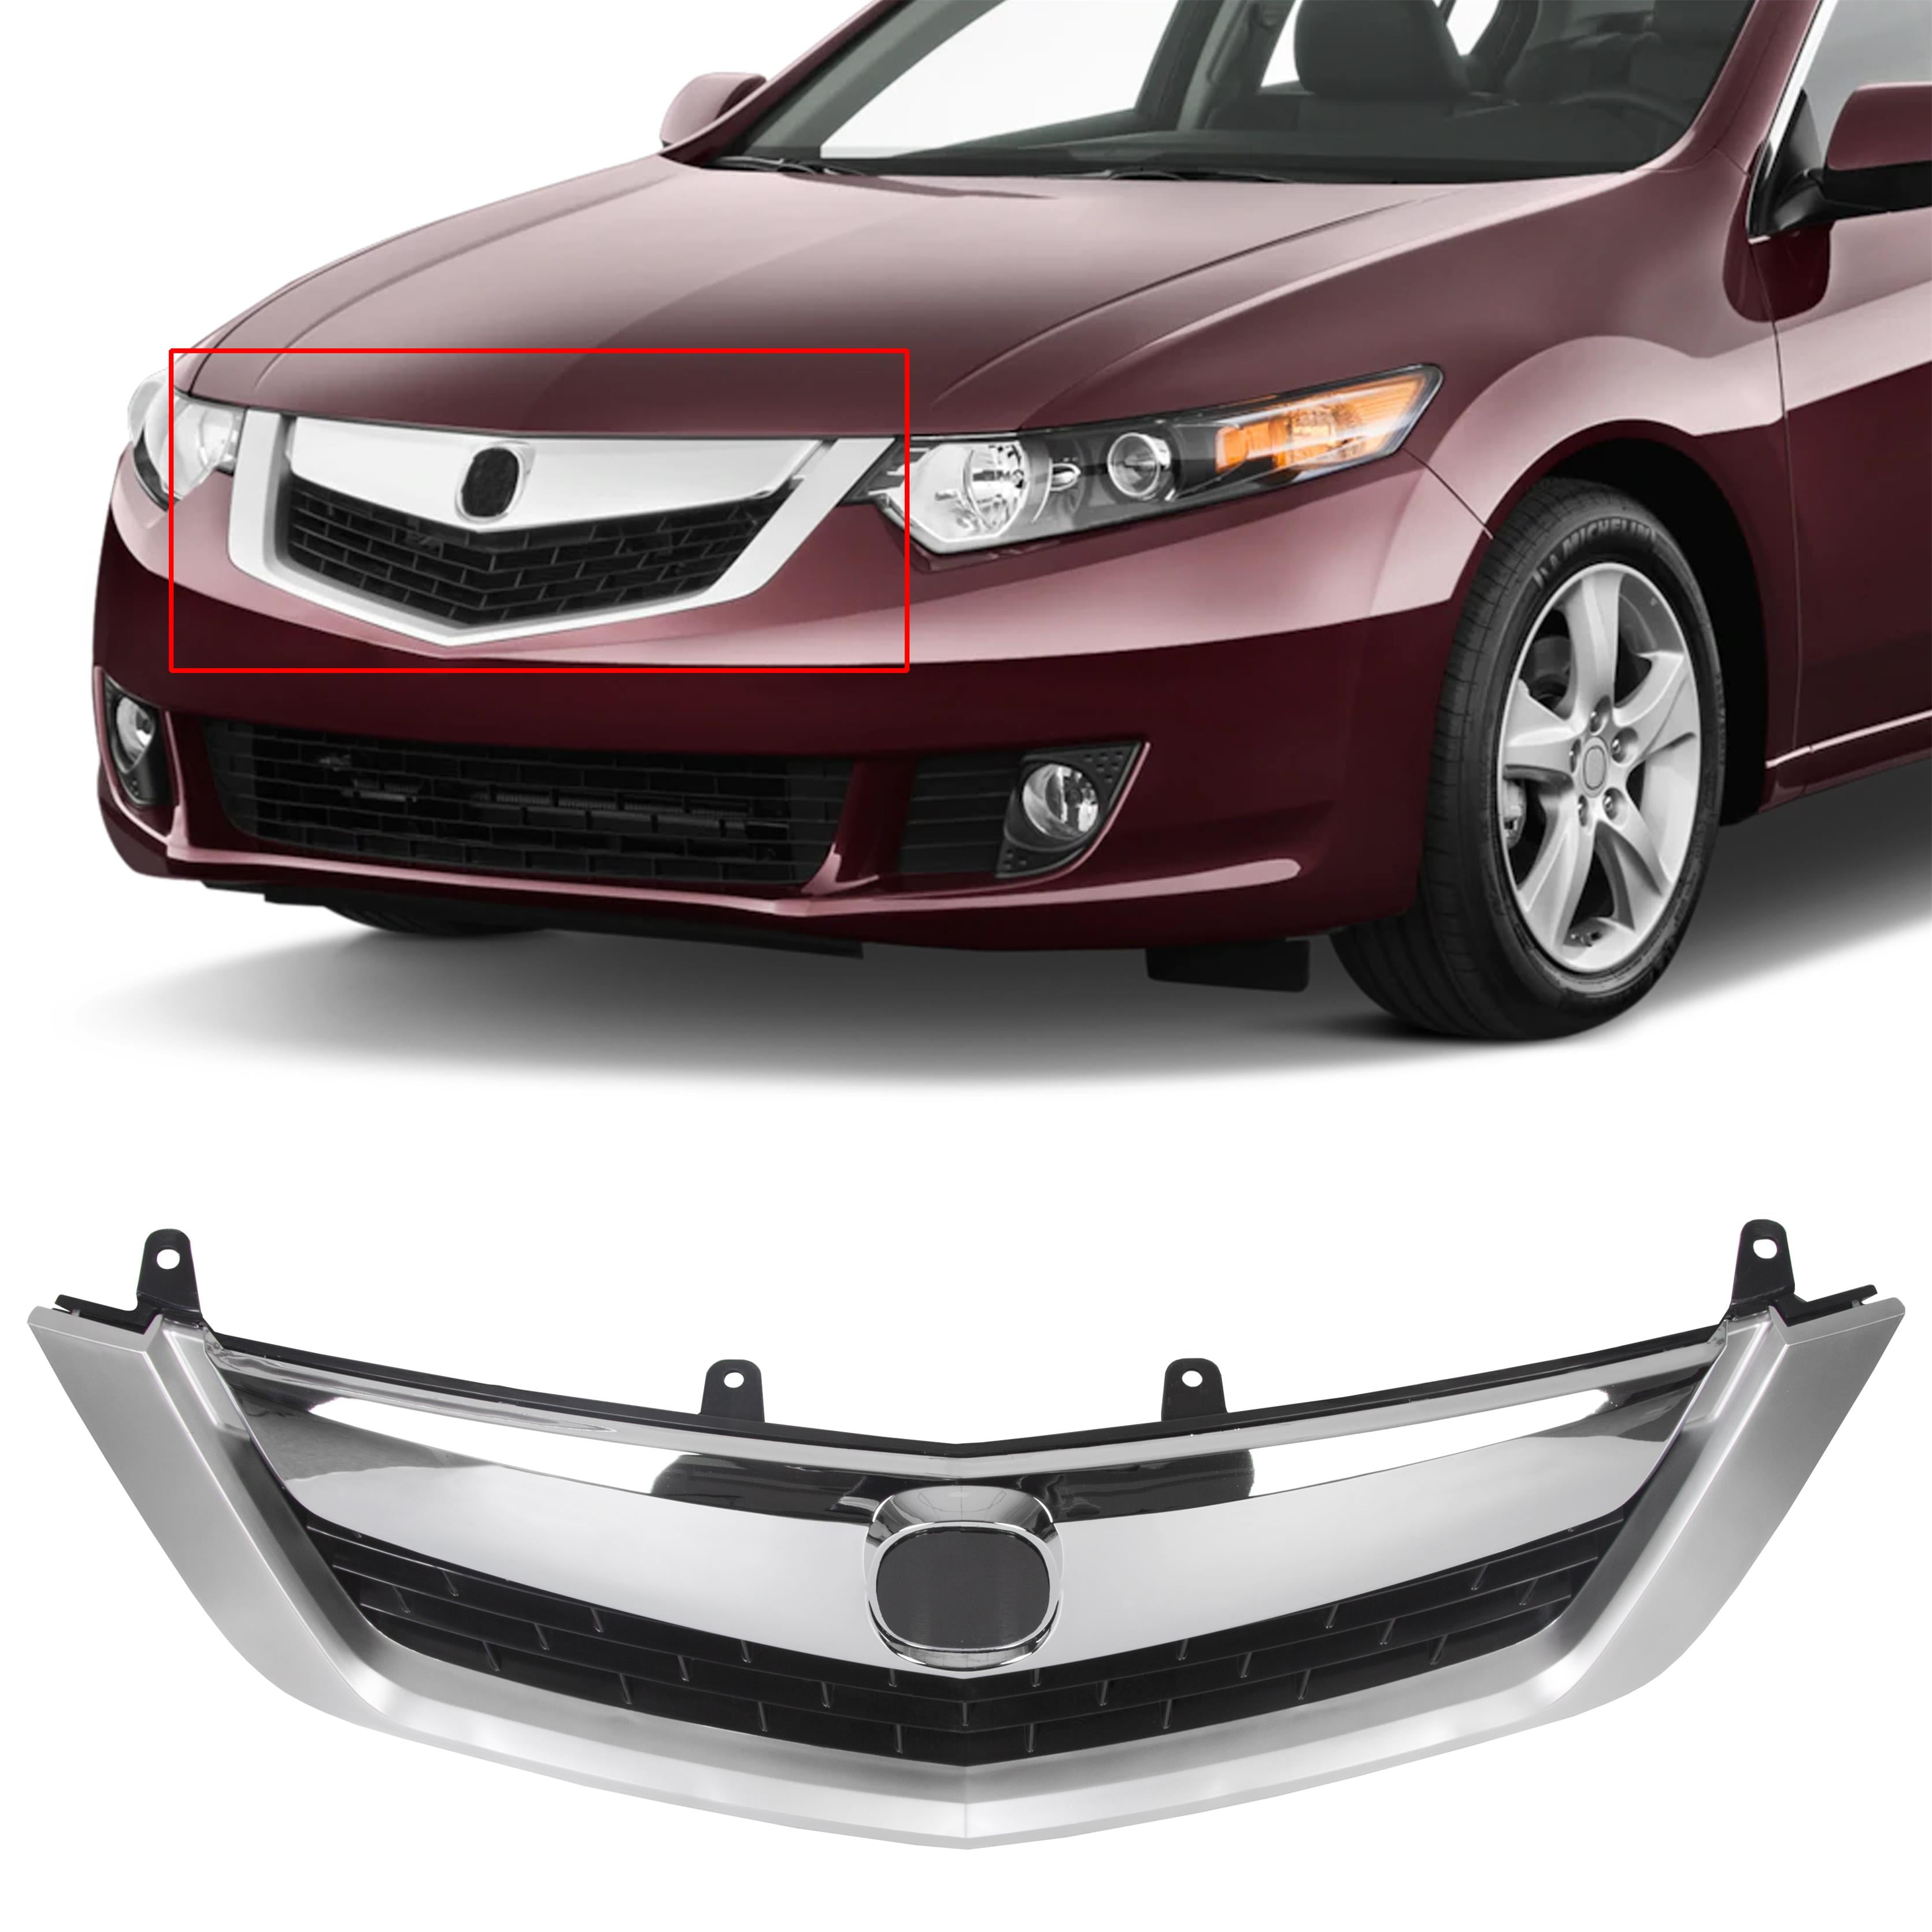 09-10 ACURA TSX FRONT UPPER+LOWER STAINLESS STEEL MESH GRILLE GRILL COMBO CHROME